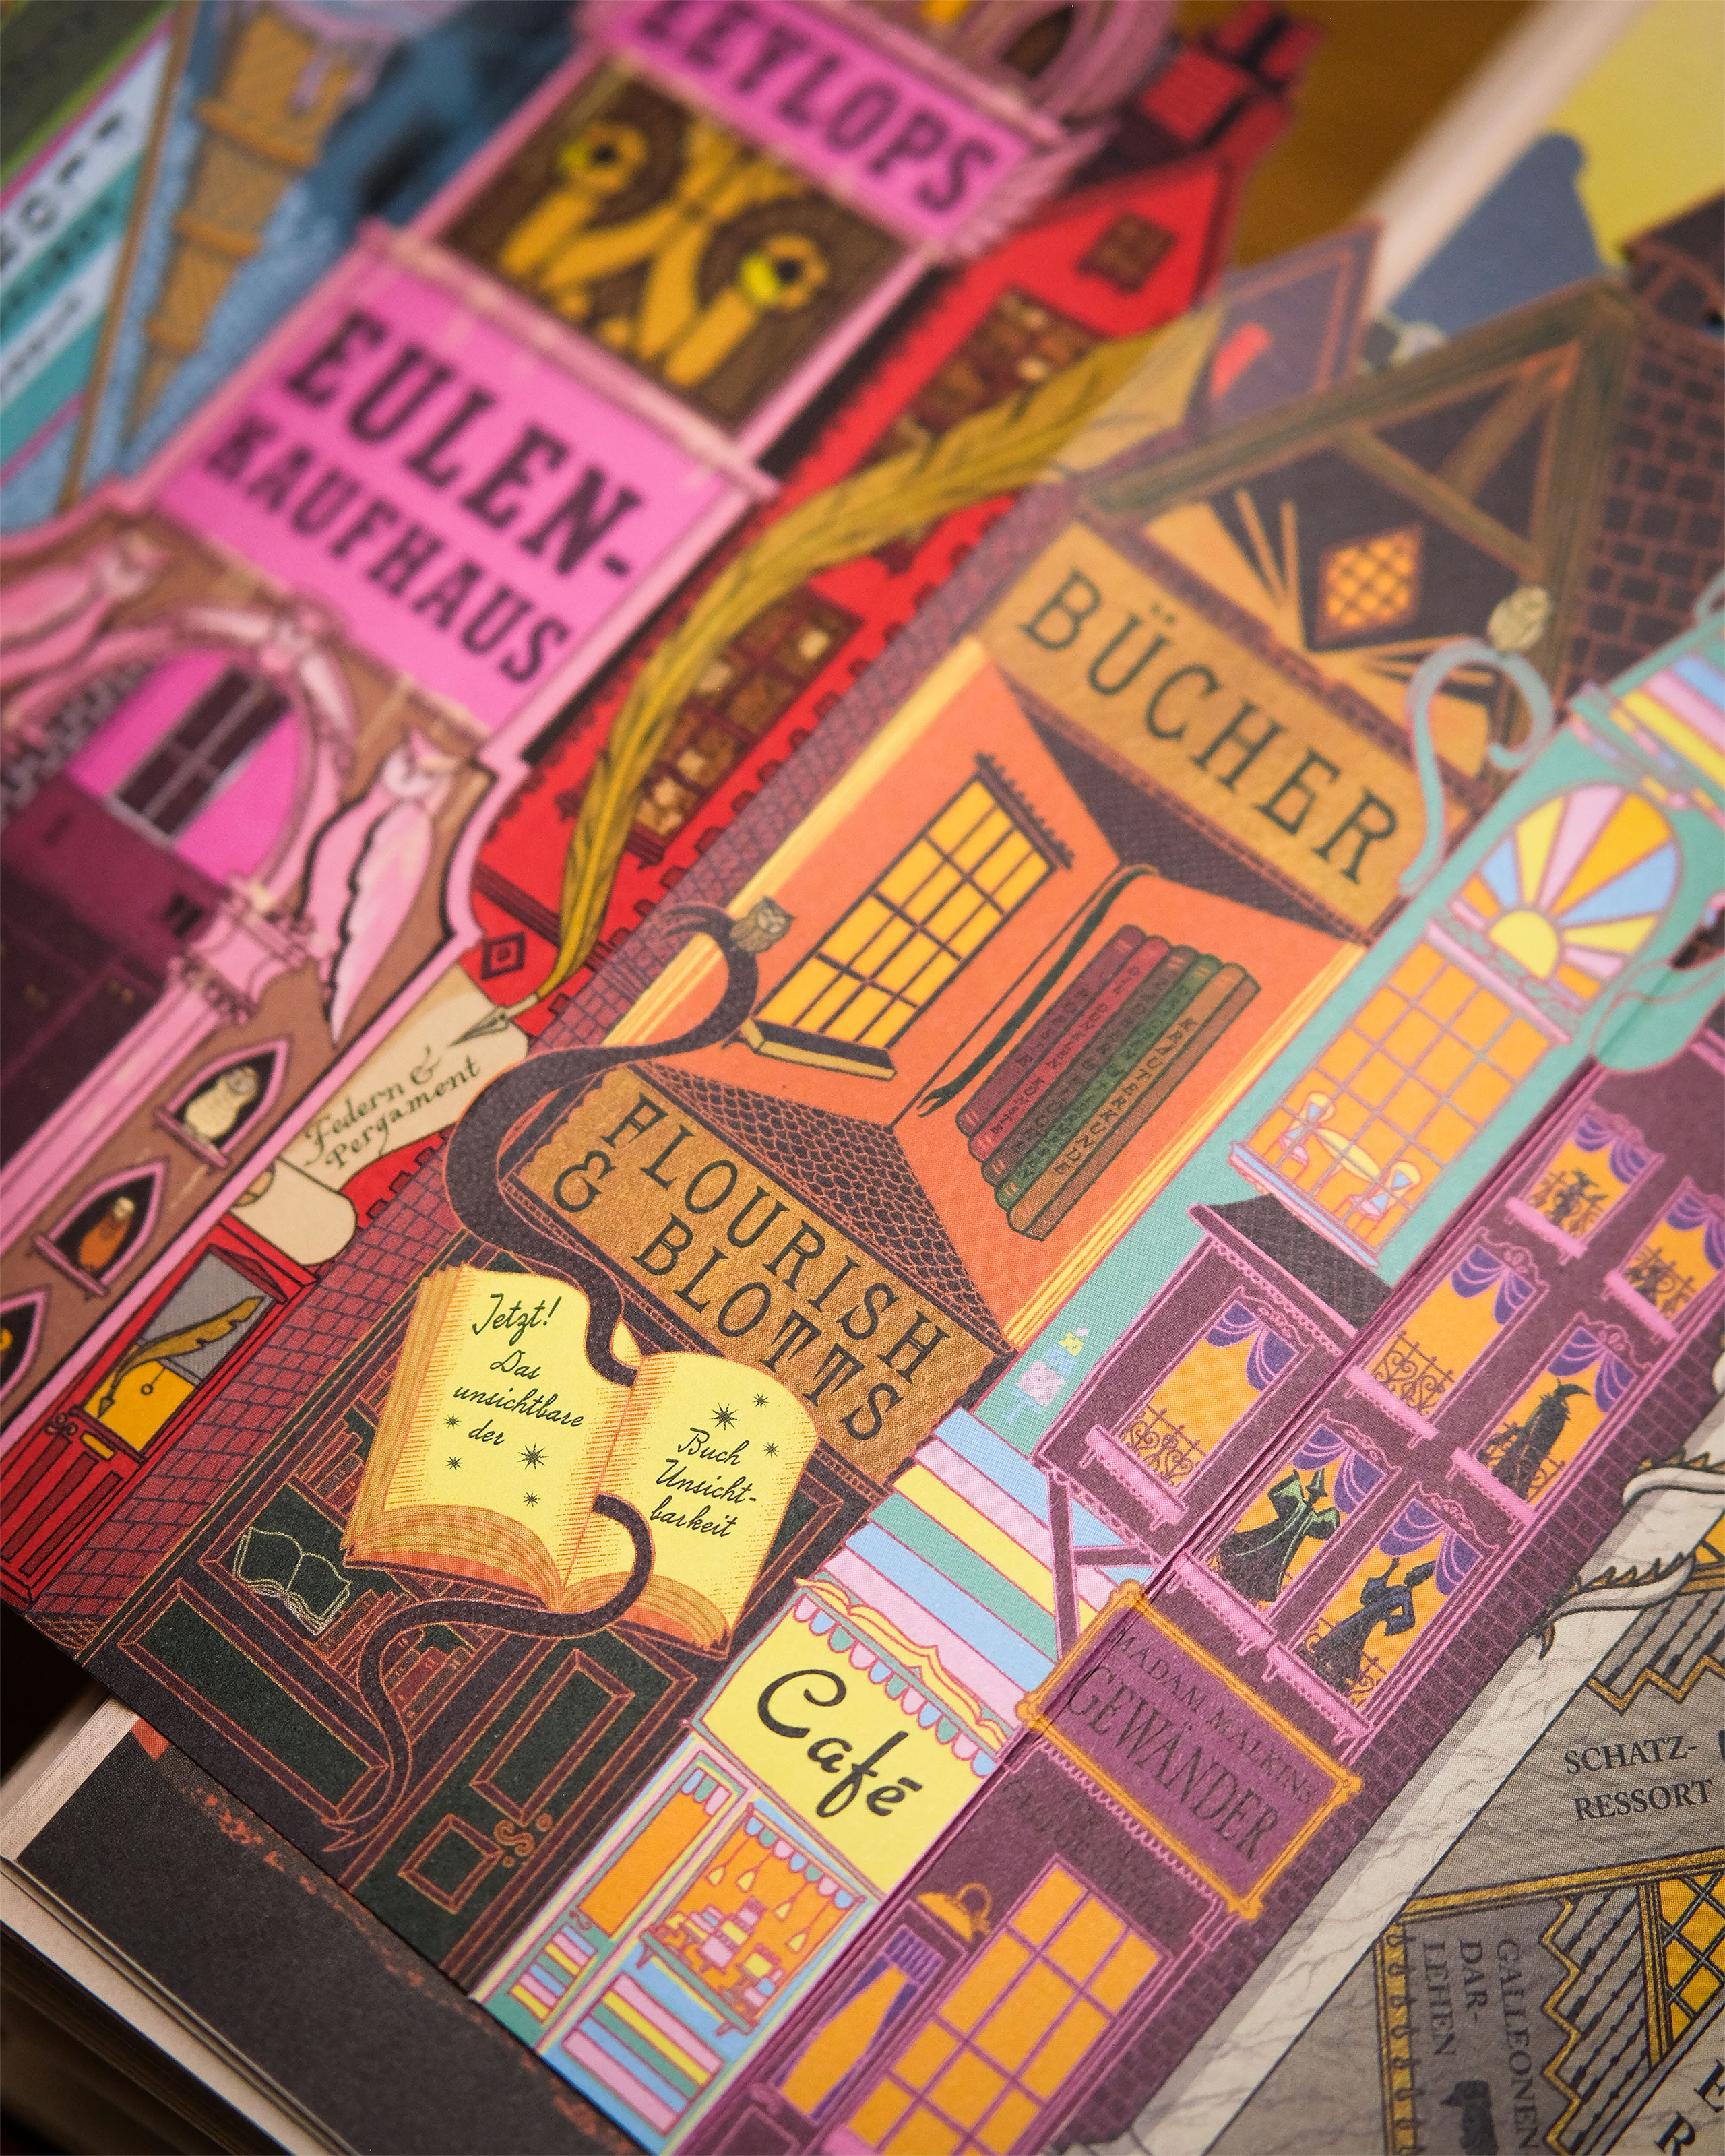 Harry Potter and the Philosopher's Stone - MinaLima Edition